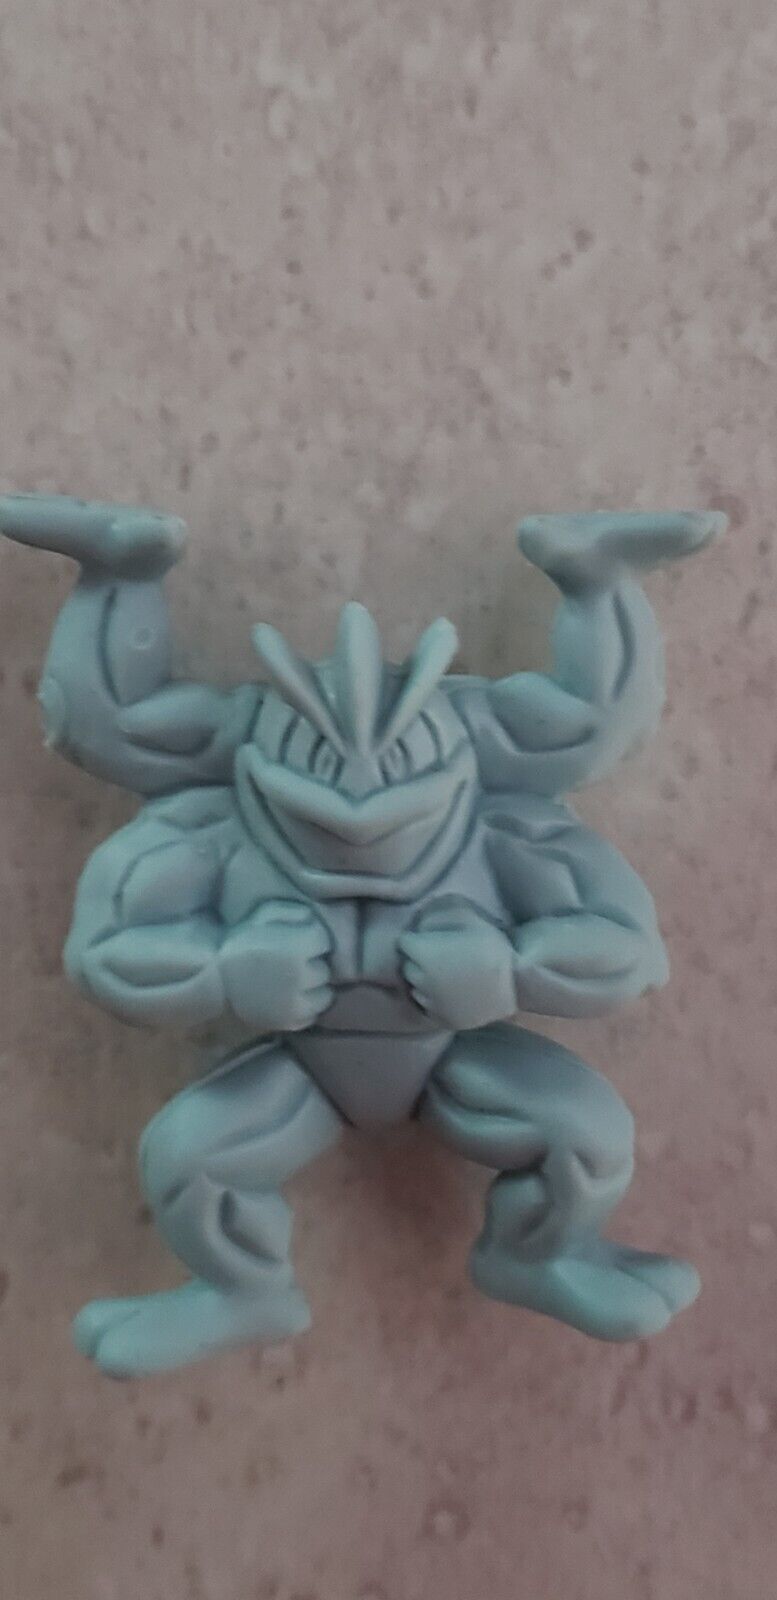 1999 Pokemon rubber figure erasers Machamp; one inch; pre-owned GOOD; blue/grey